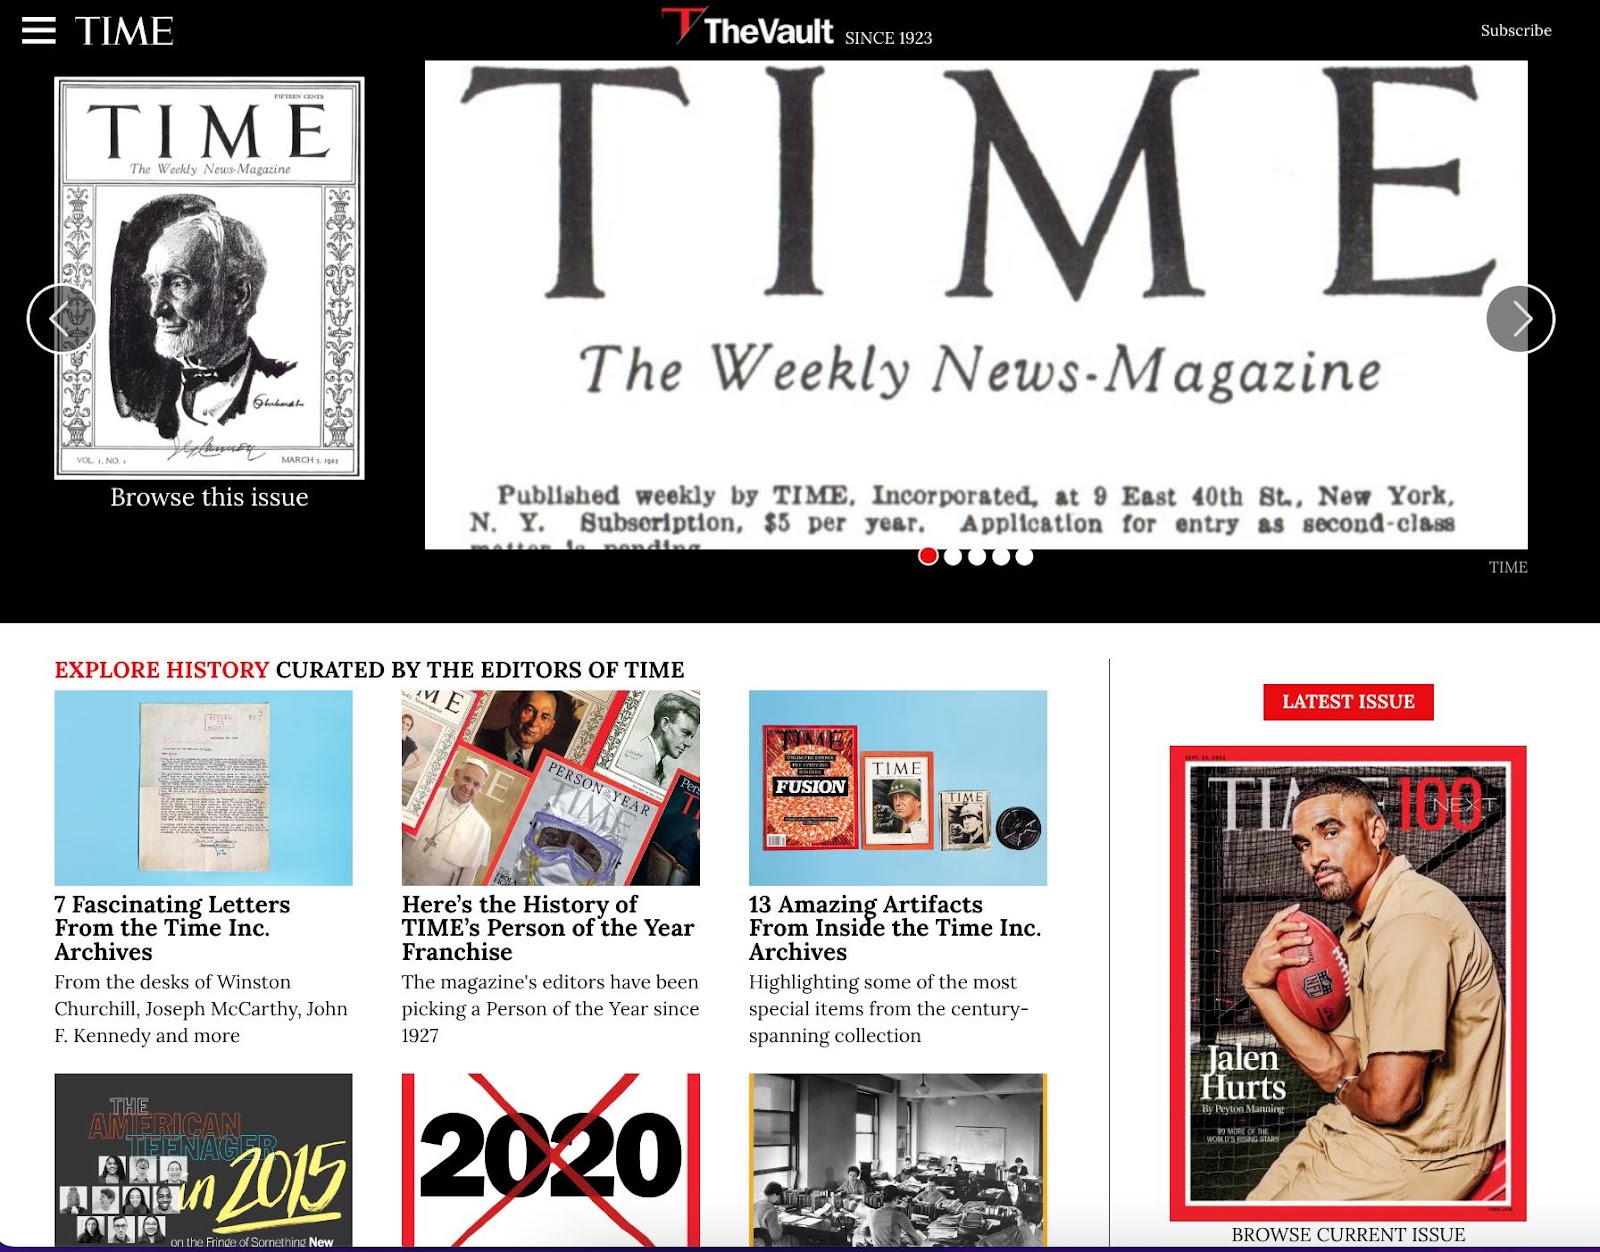 Time's website showing ungated content